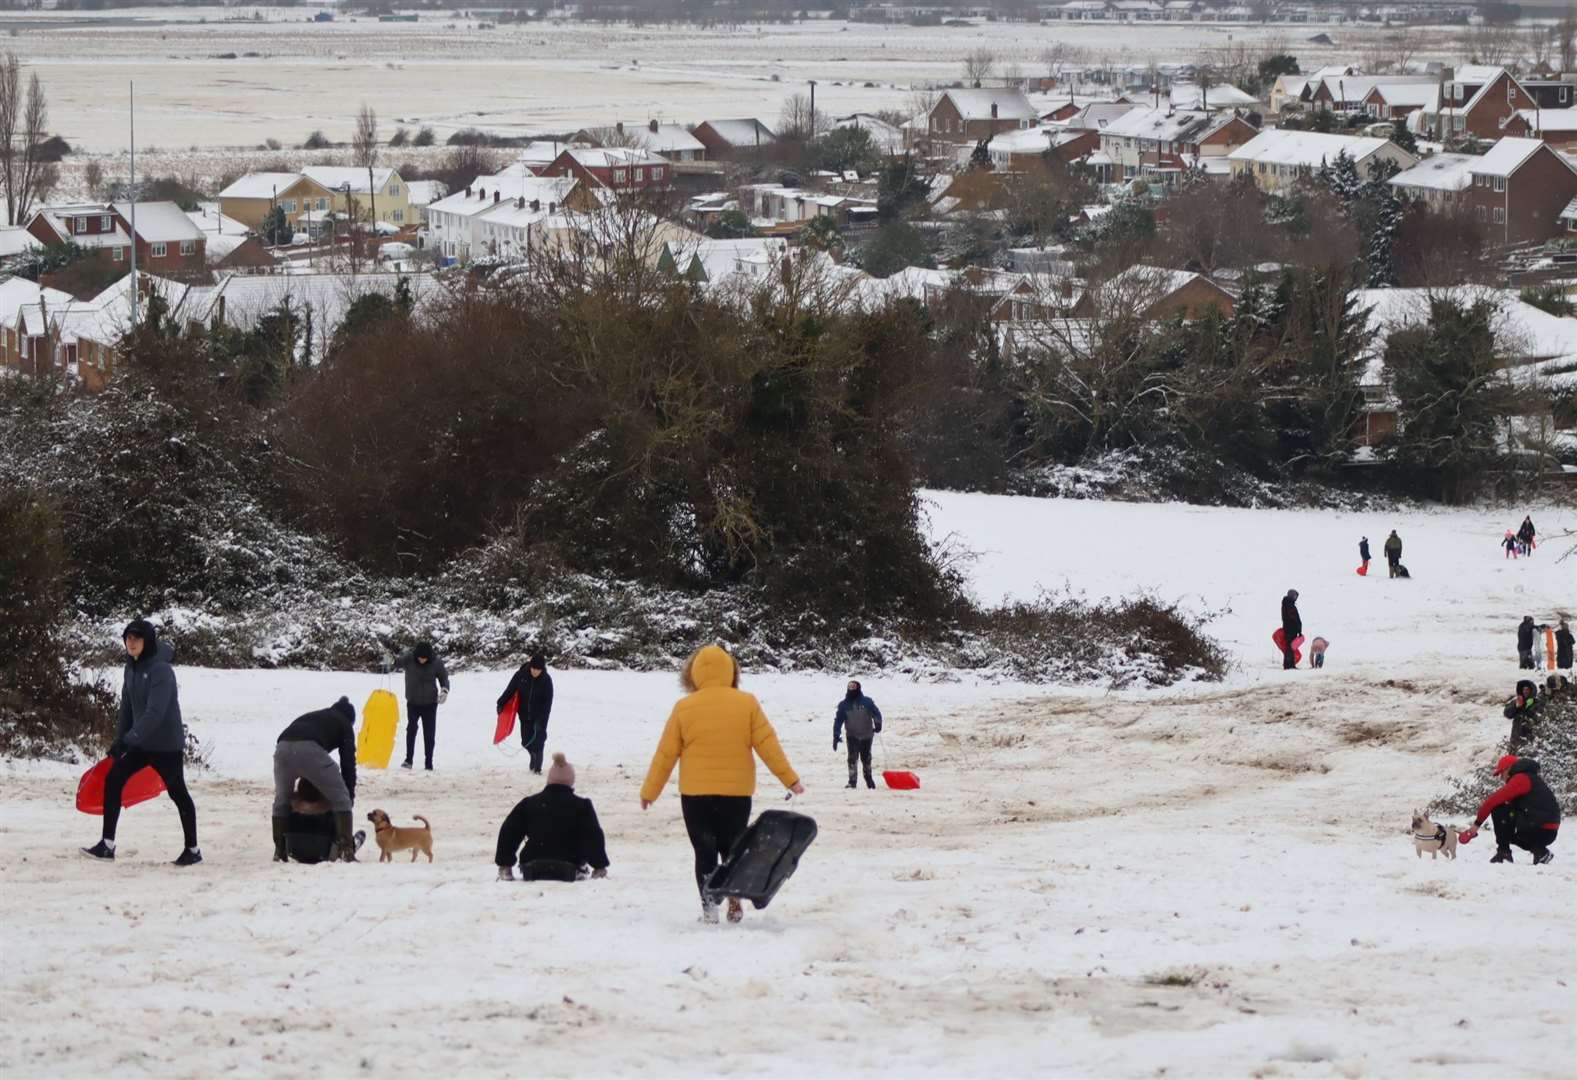 Sheppey became the Isle of White after heavy snowfall in February. Pictured is Bunny Bank, Minster